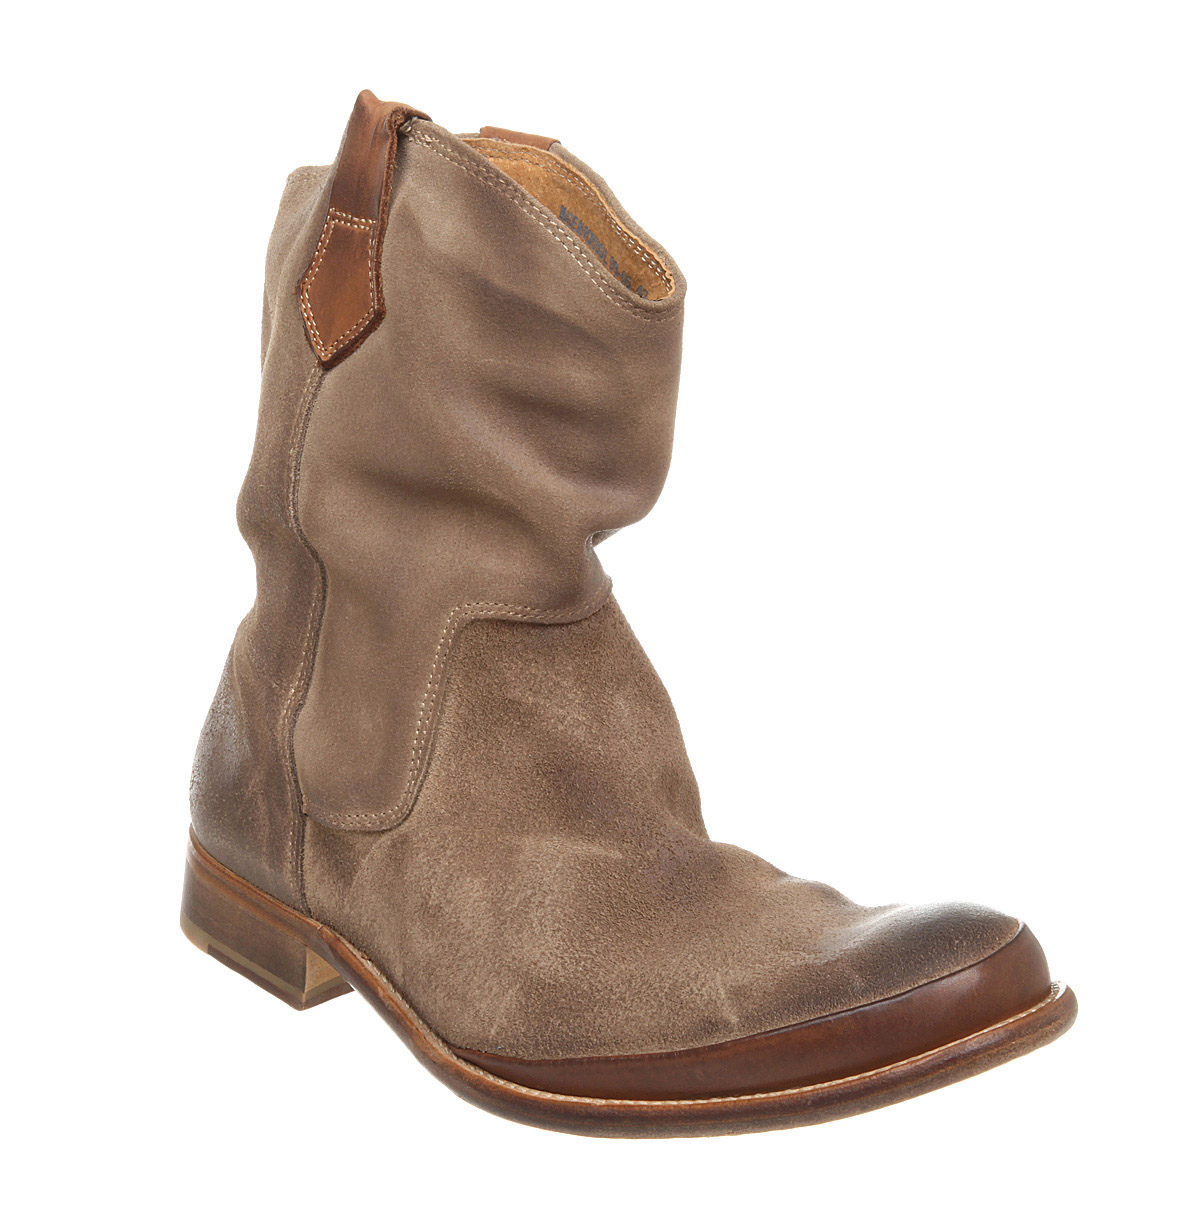 H by Hudson Armada Slouch Boot Tan Suede in Brown for Men - Lyst